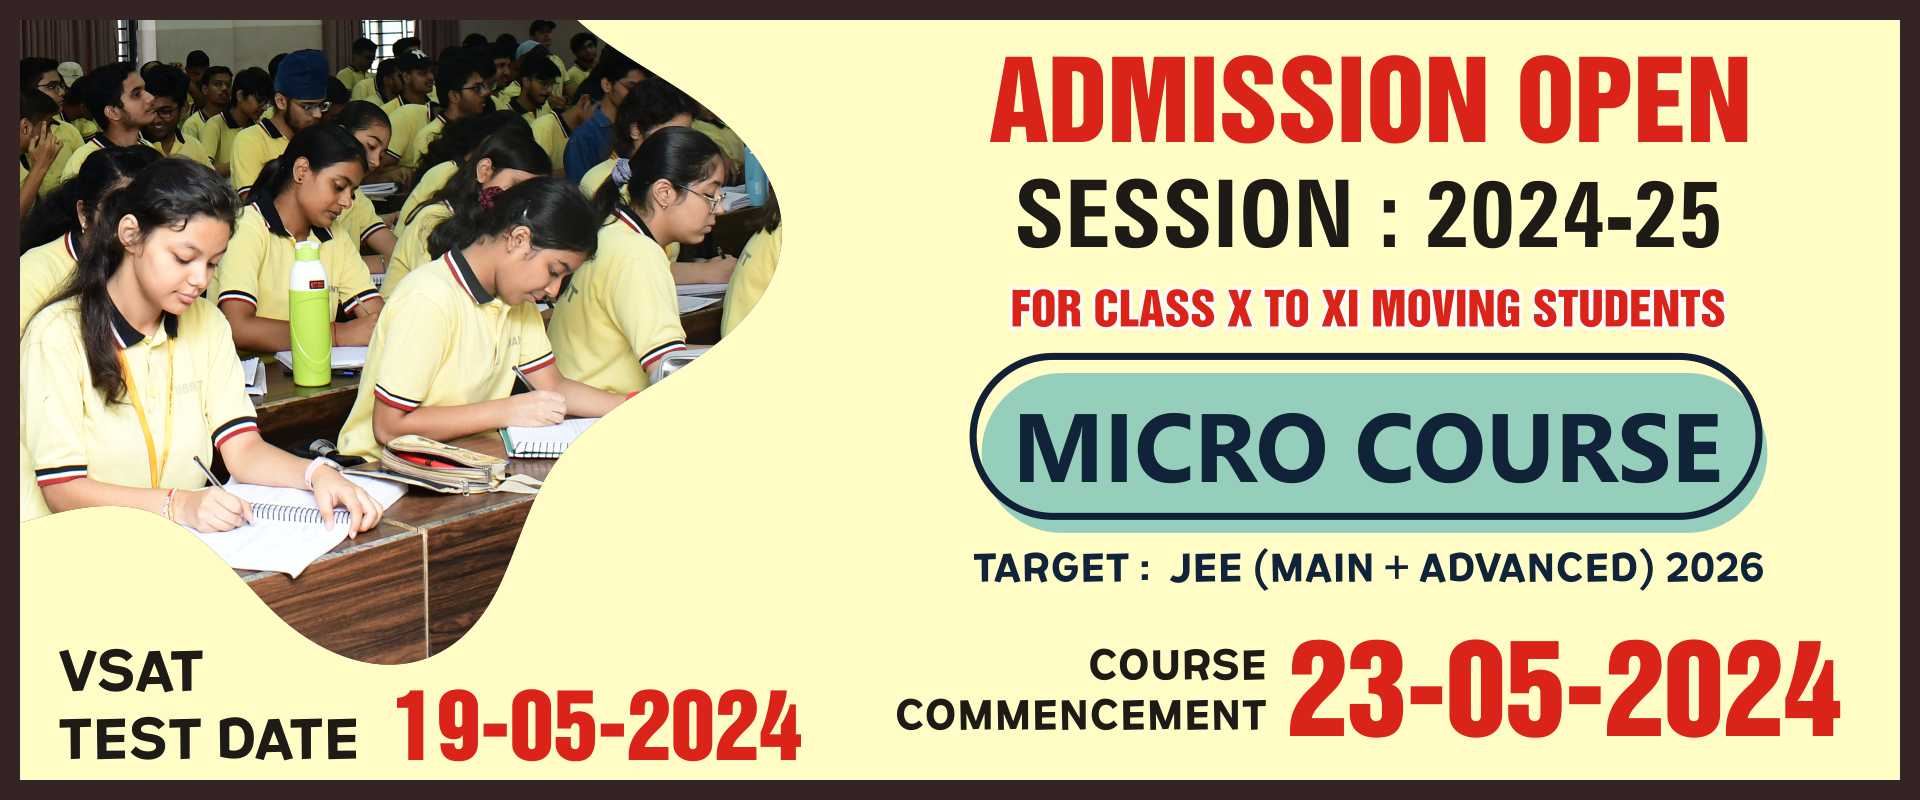 MICRO COURSE for Class 10 to 11 moving JEE Aspirants